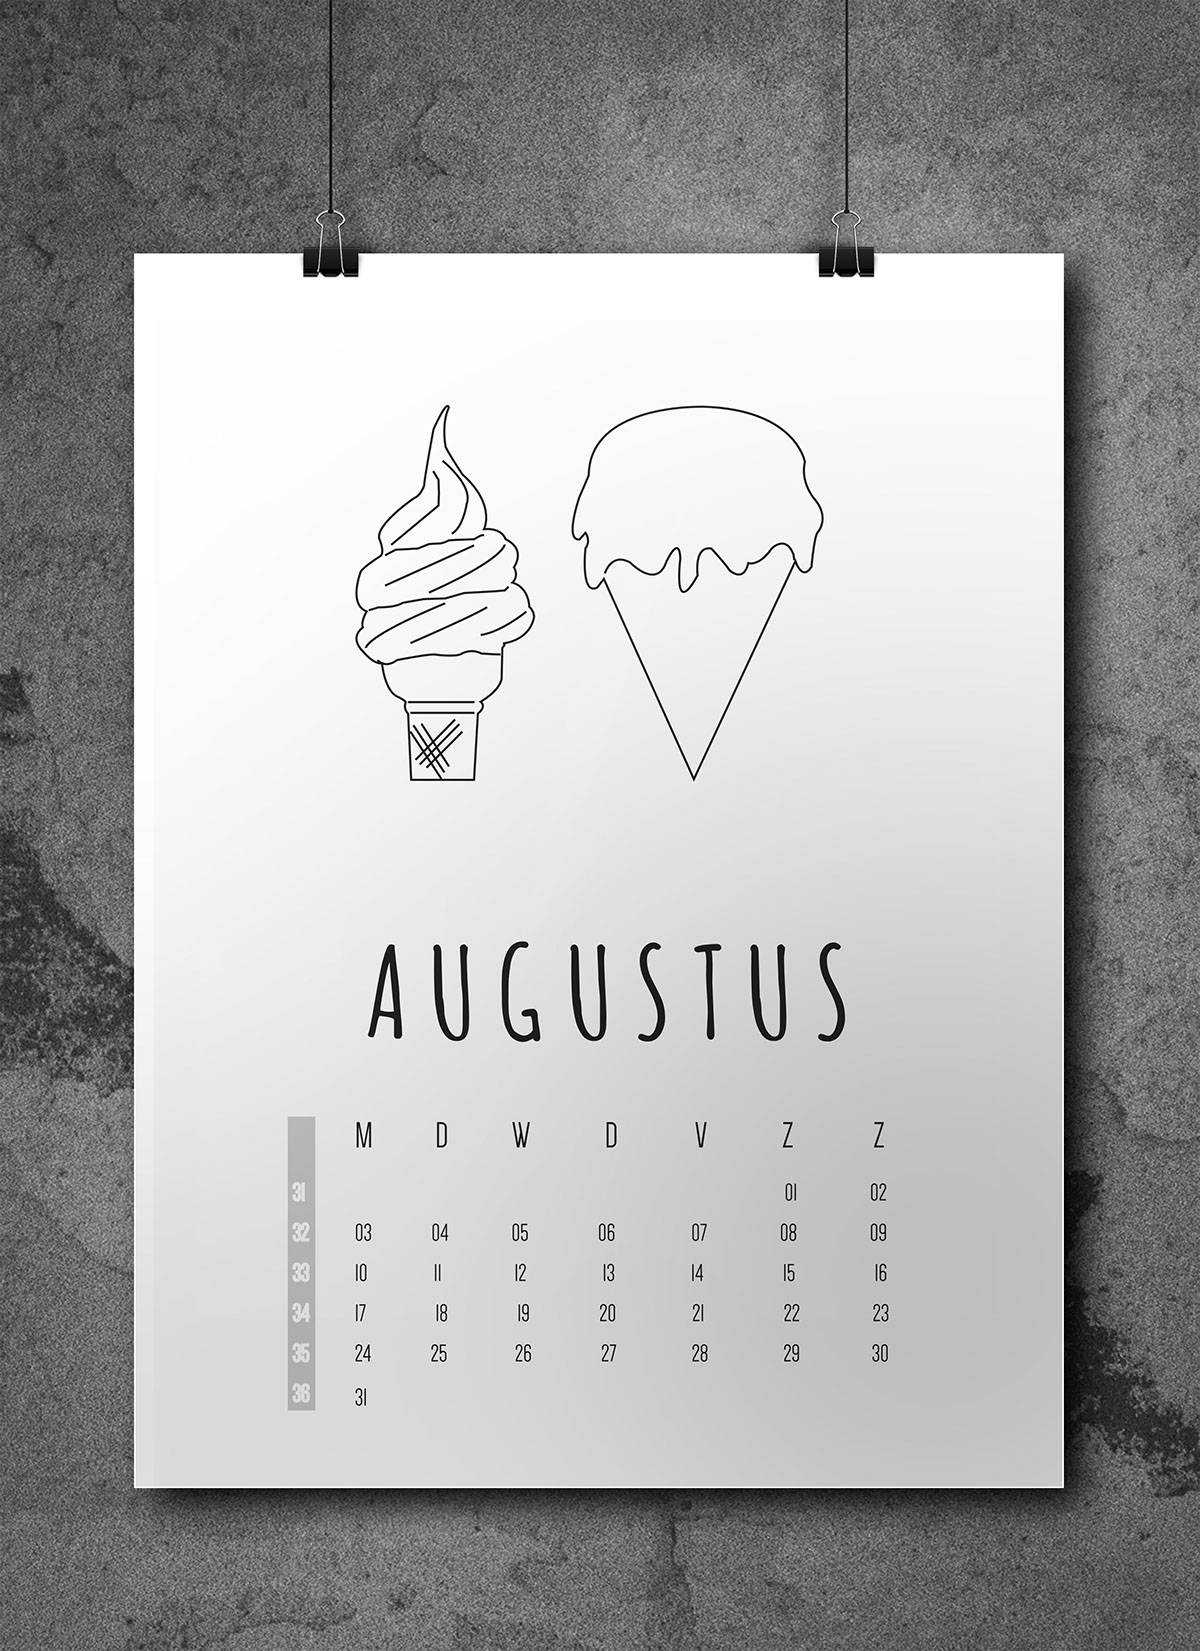 #art #calendar #2015 #months #year #colours #12 #graphicDesign #graphic #Design